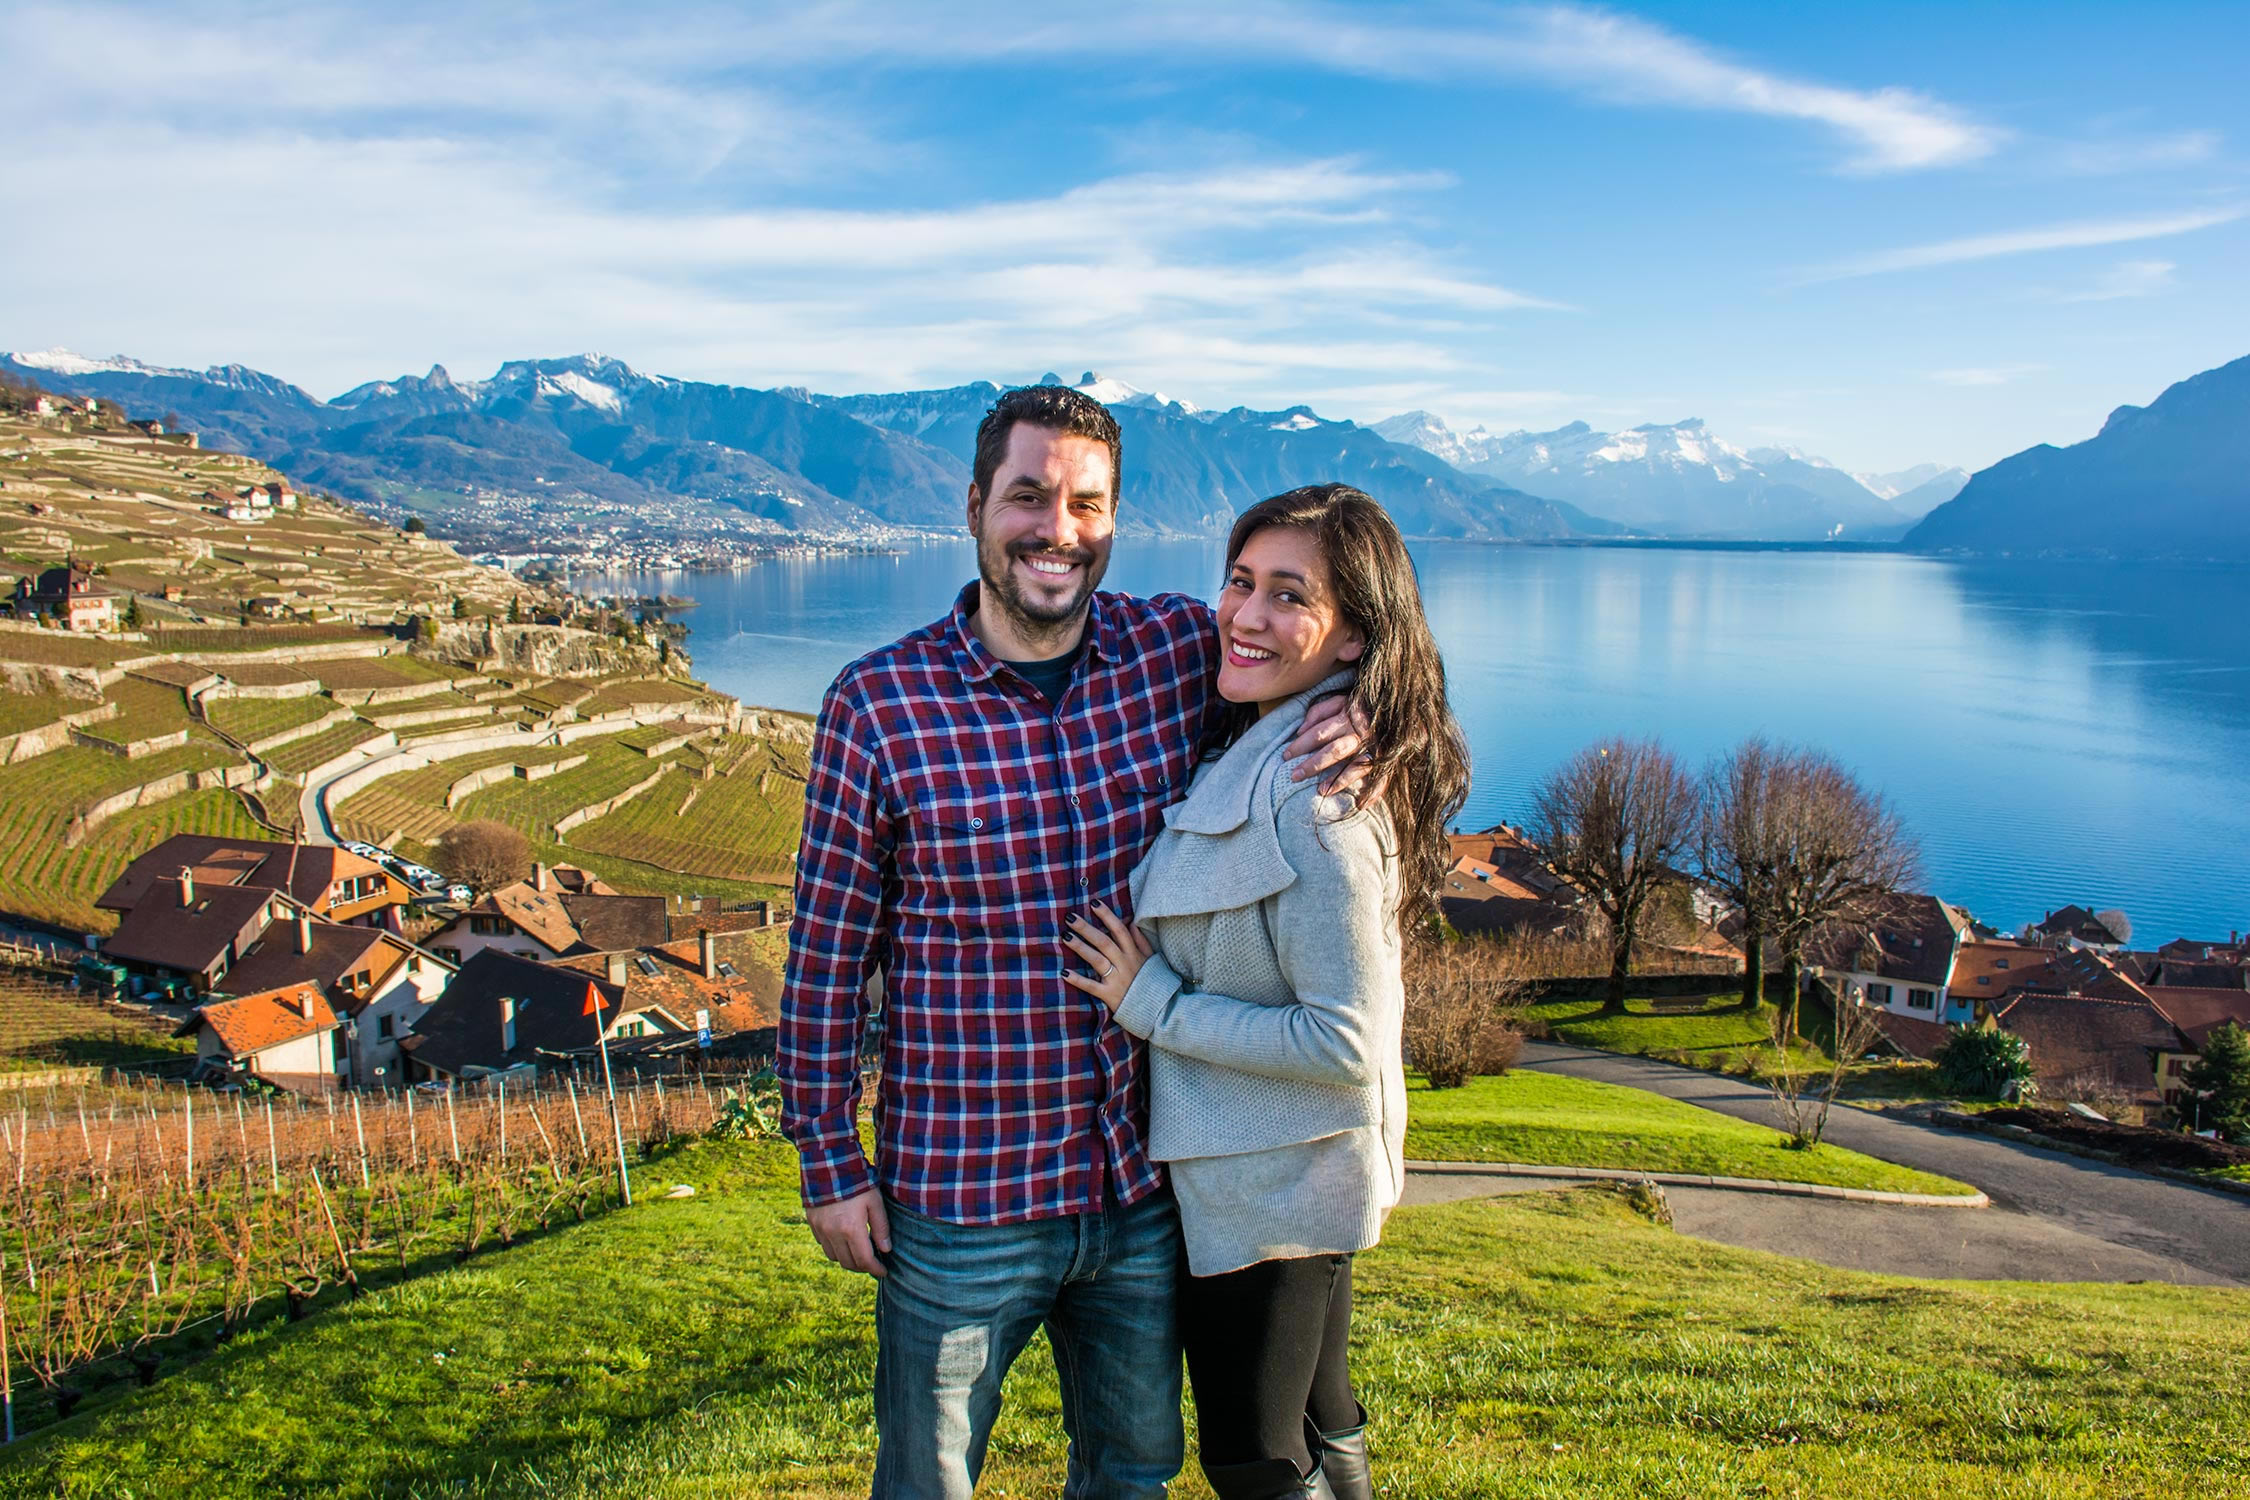 An Interview with Chris and Danika of luxury travel blog, No Destinations